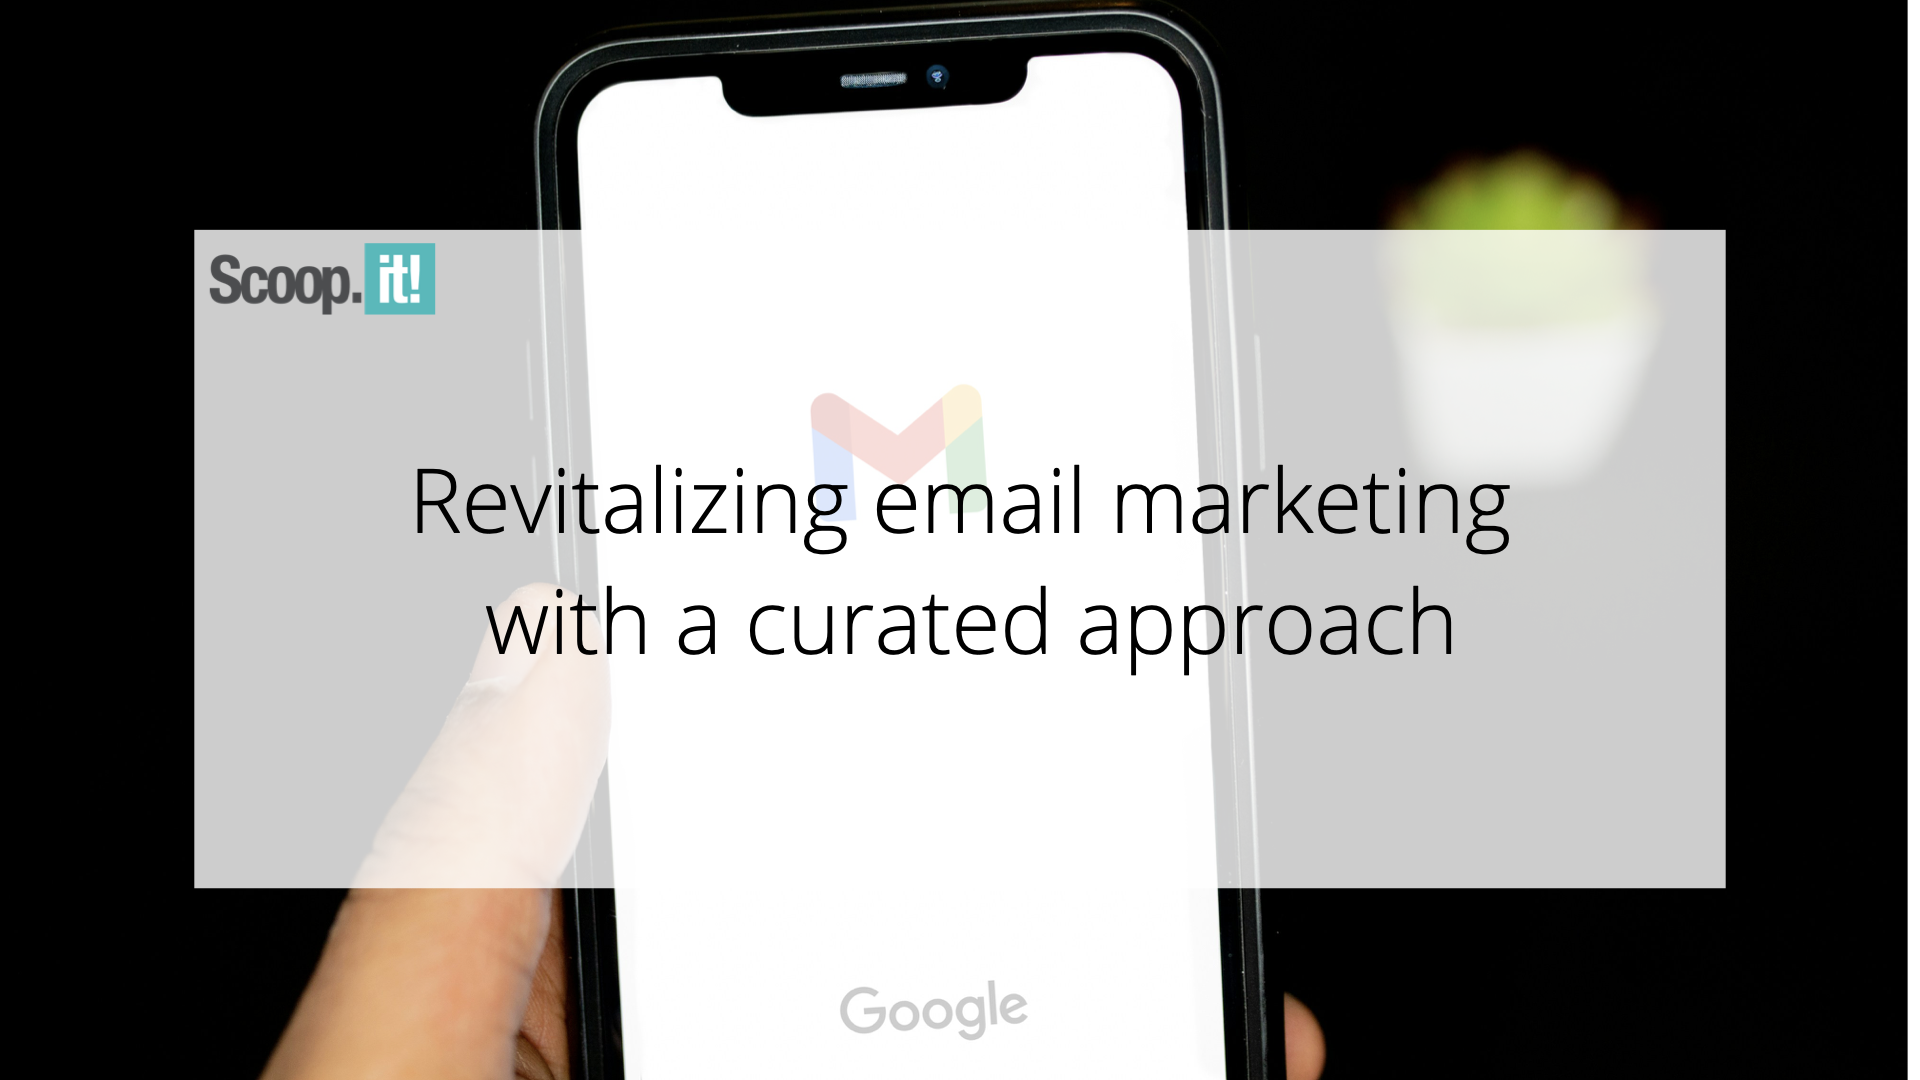 revitalizing-email-marketing-with-a-curated-approach-–-scoop.it-blog